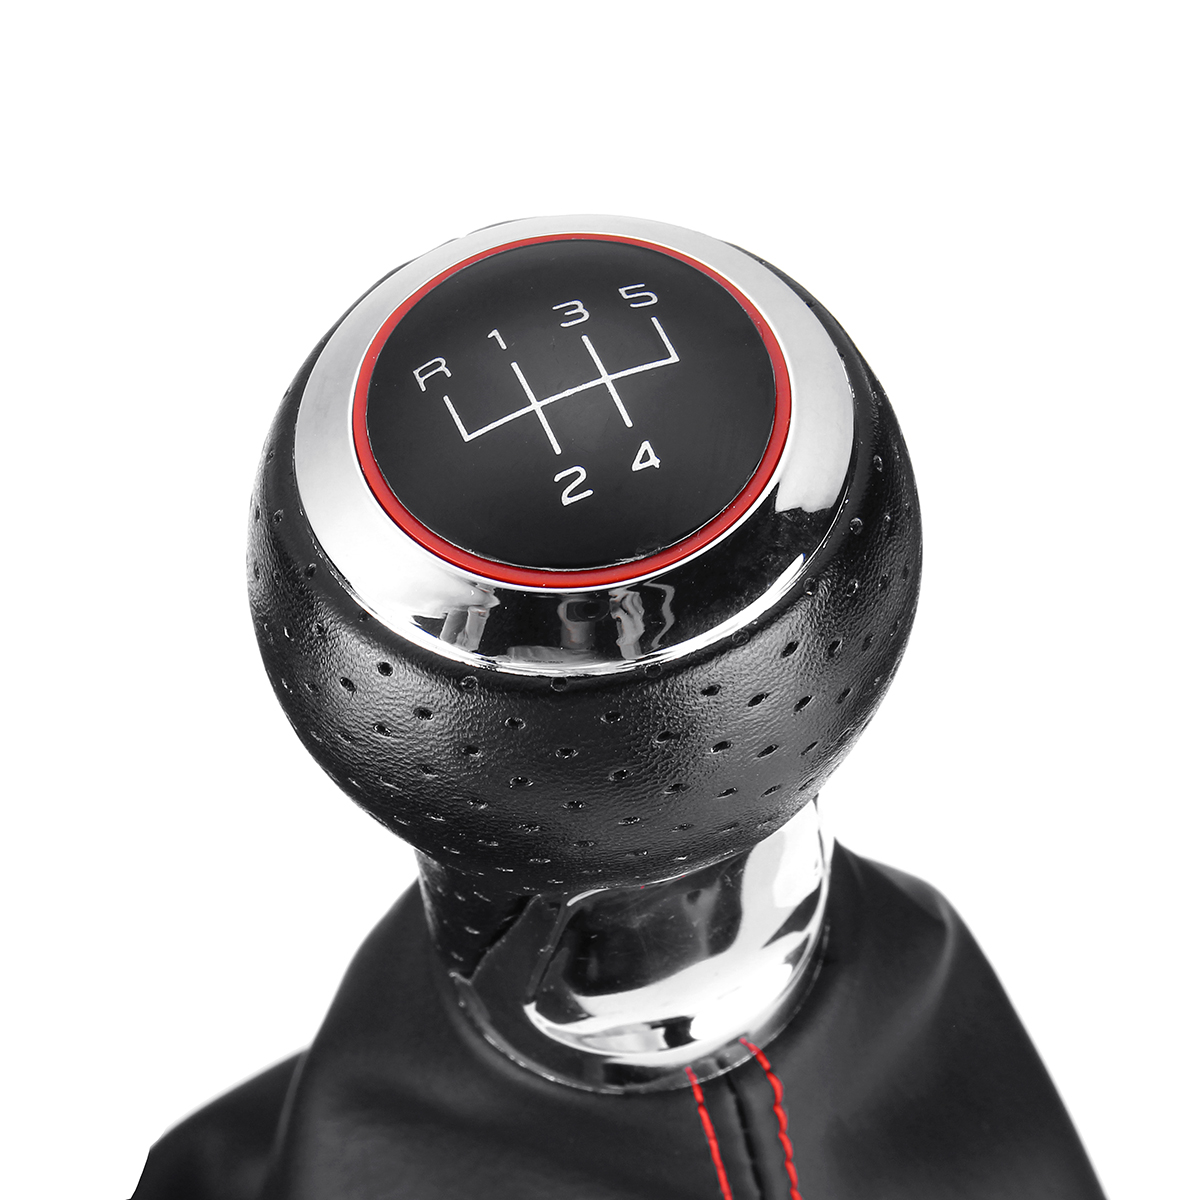 5 Speed Gear Shift Knob Shifter with Boot Cover Leather for AUDI A3 A4 Q5 S3 S4